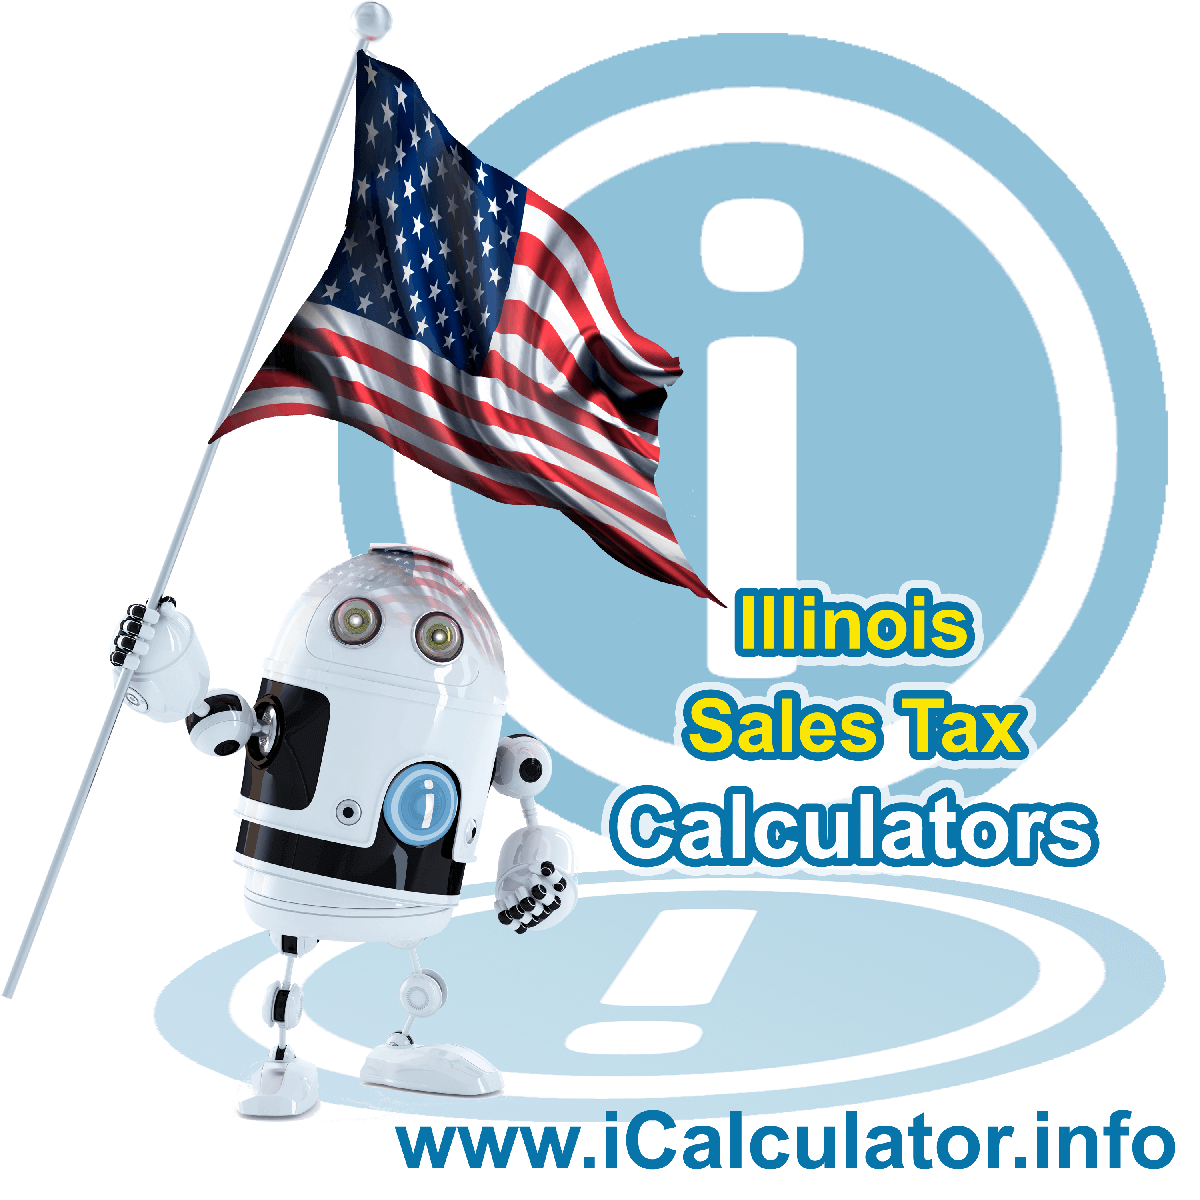 Mason City Sales Rates: This image illustrates a calculator robot calculating Mason City sales tax manually using the Mason City Sales Tax Formula. You can use this information to calculate Mason City Sales Tax manually or use the Mason City Sales Tax Calculator to calculate sales tax online.